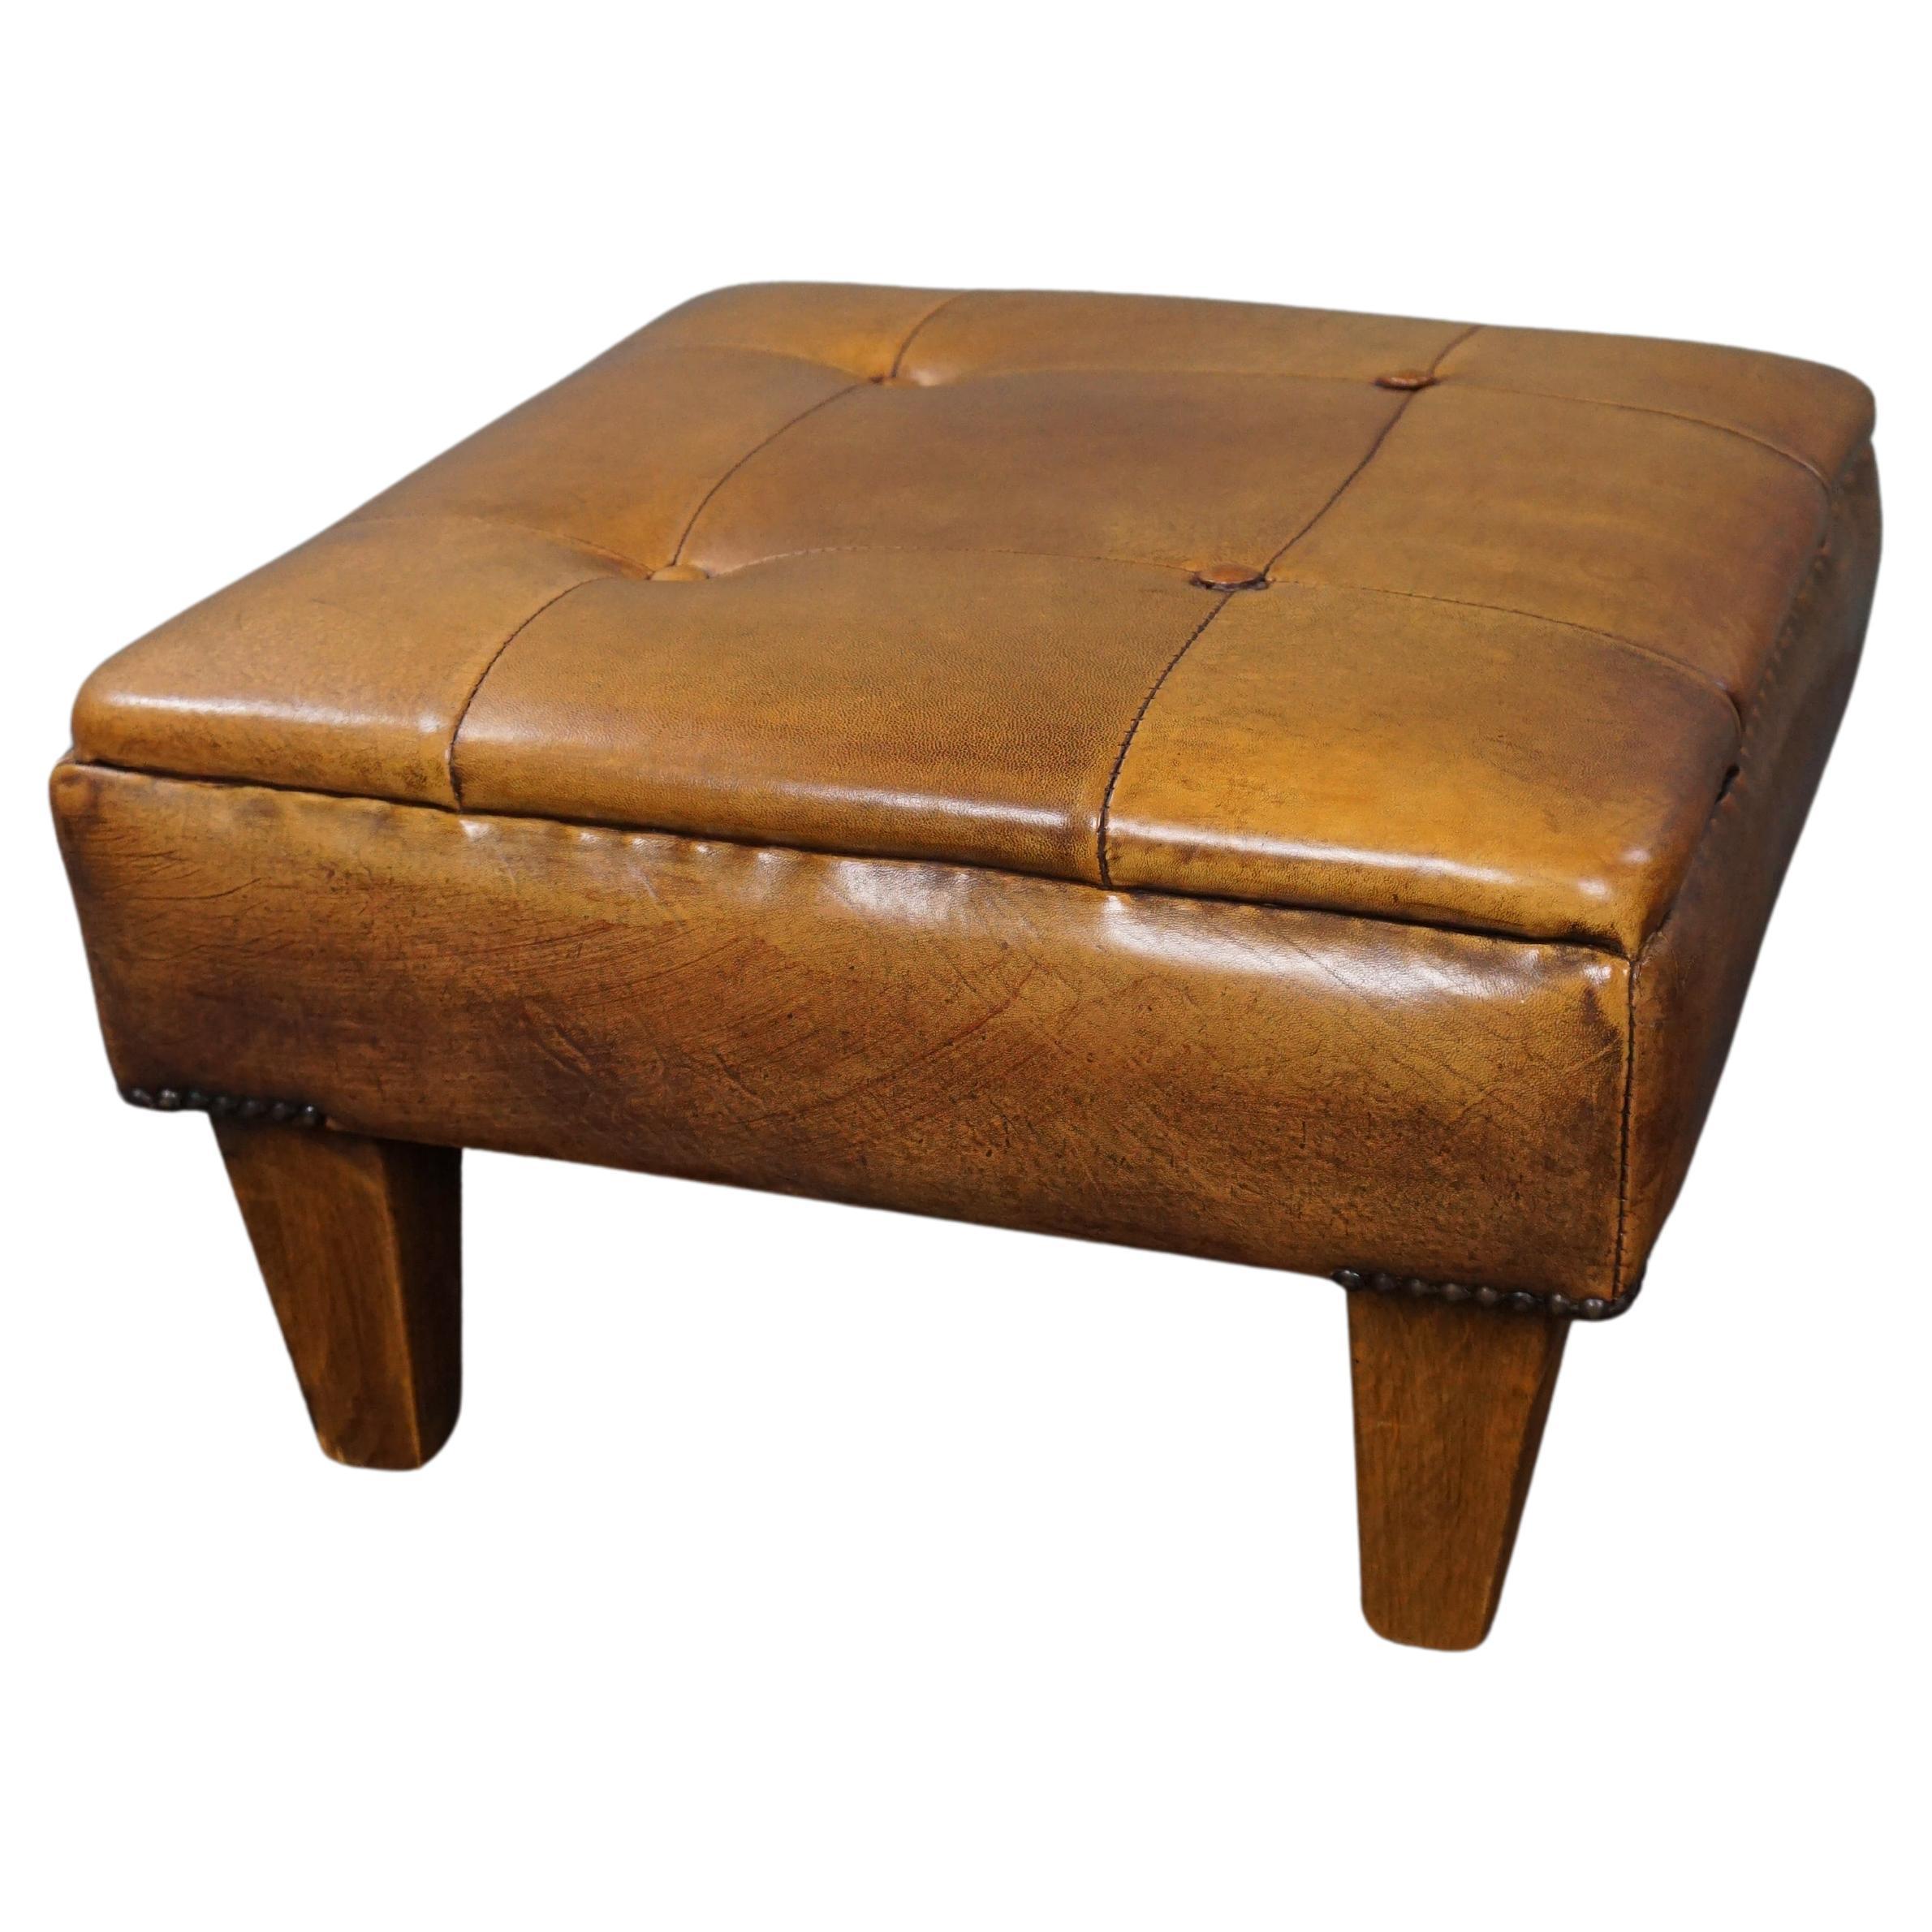 Robust button-tufted sheepskin leather ottoman